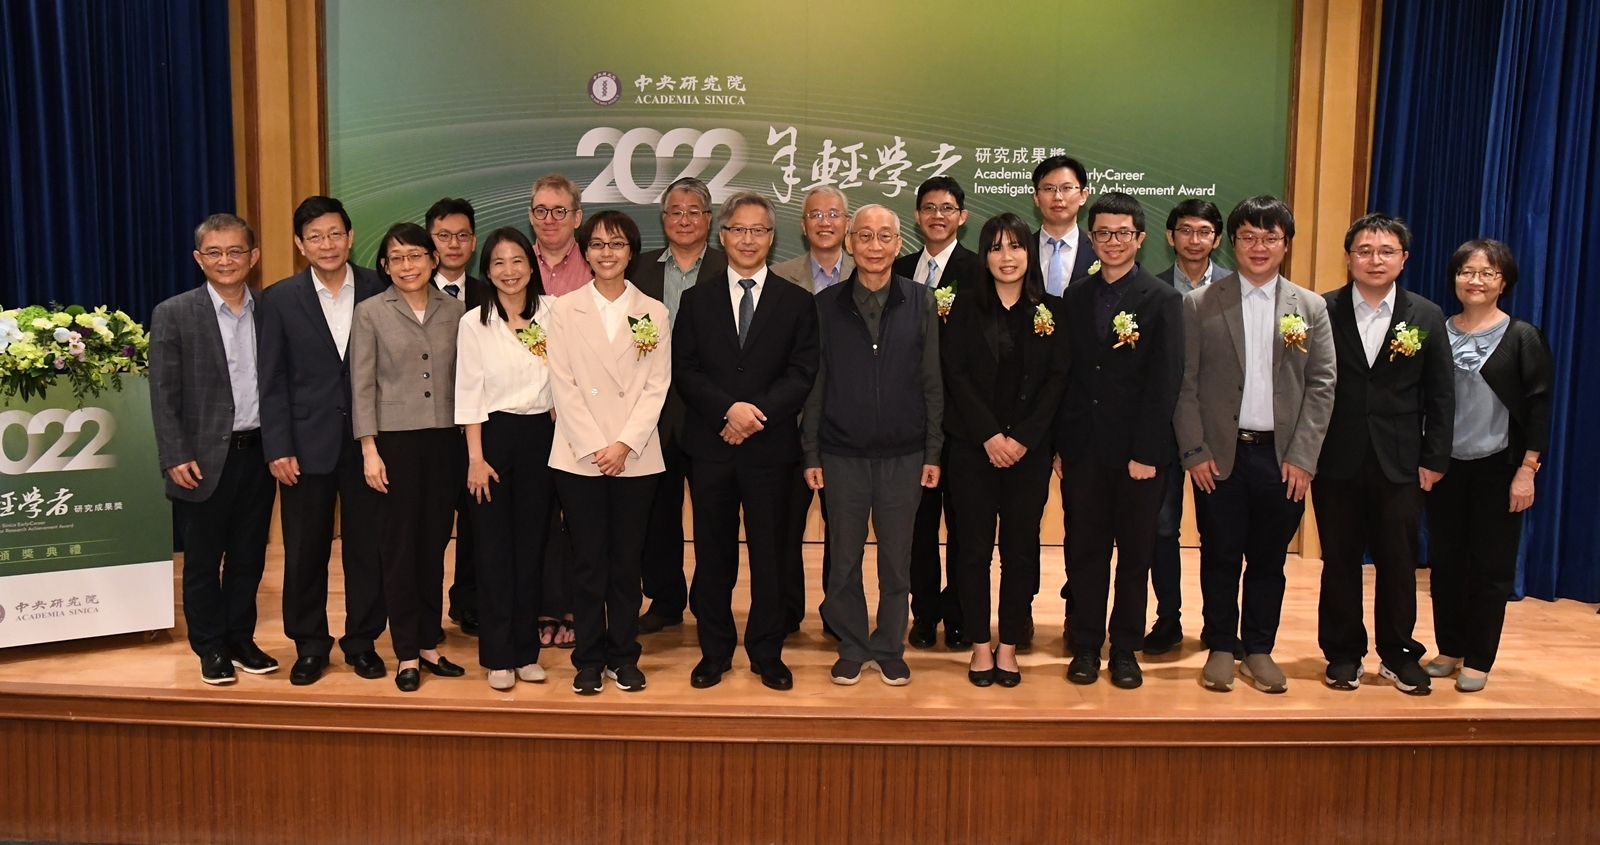 Awards Ceremony for the 2022 Academia Sinica Early-Career Investigator Research Achievement Award photo1